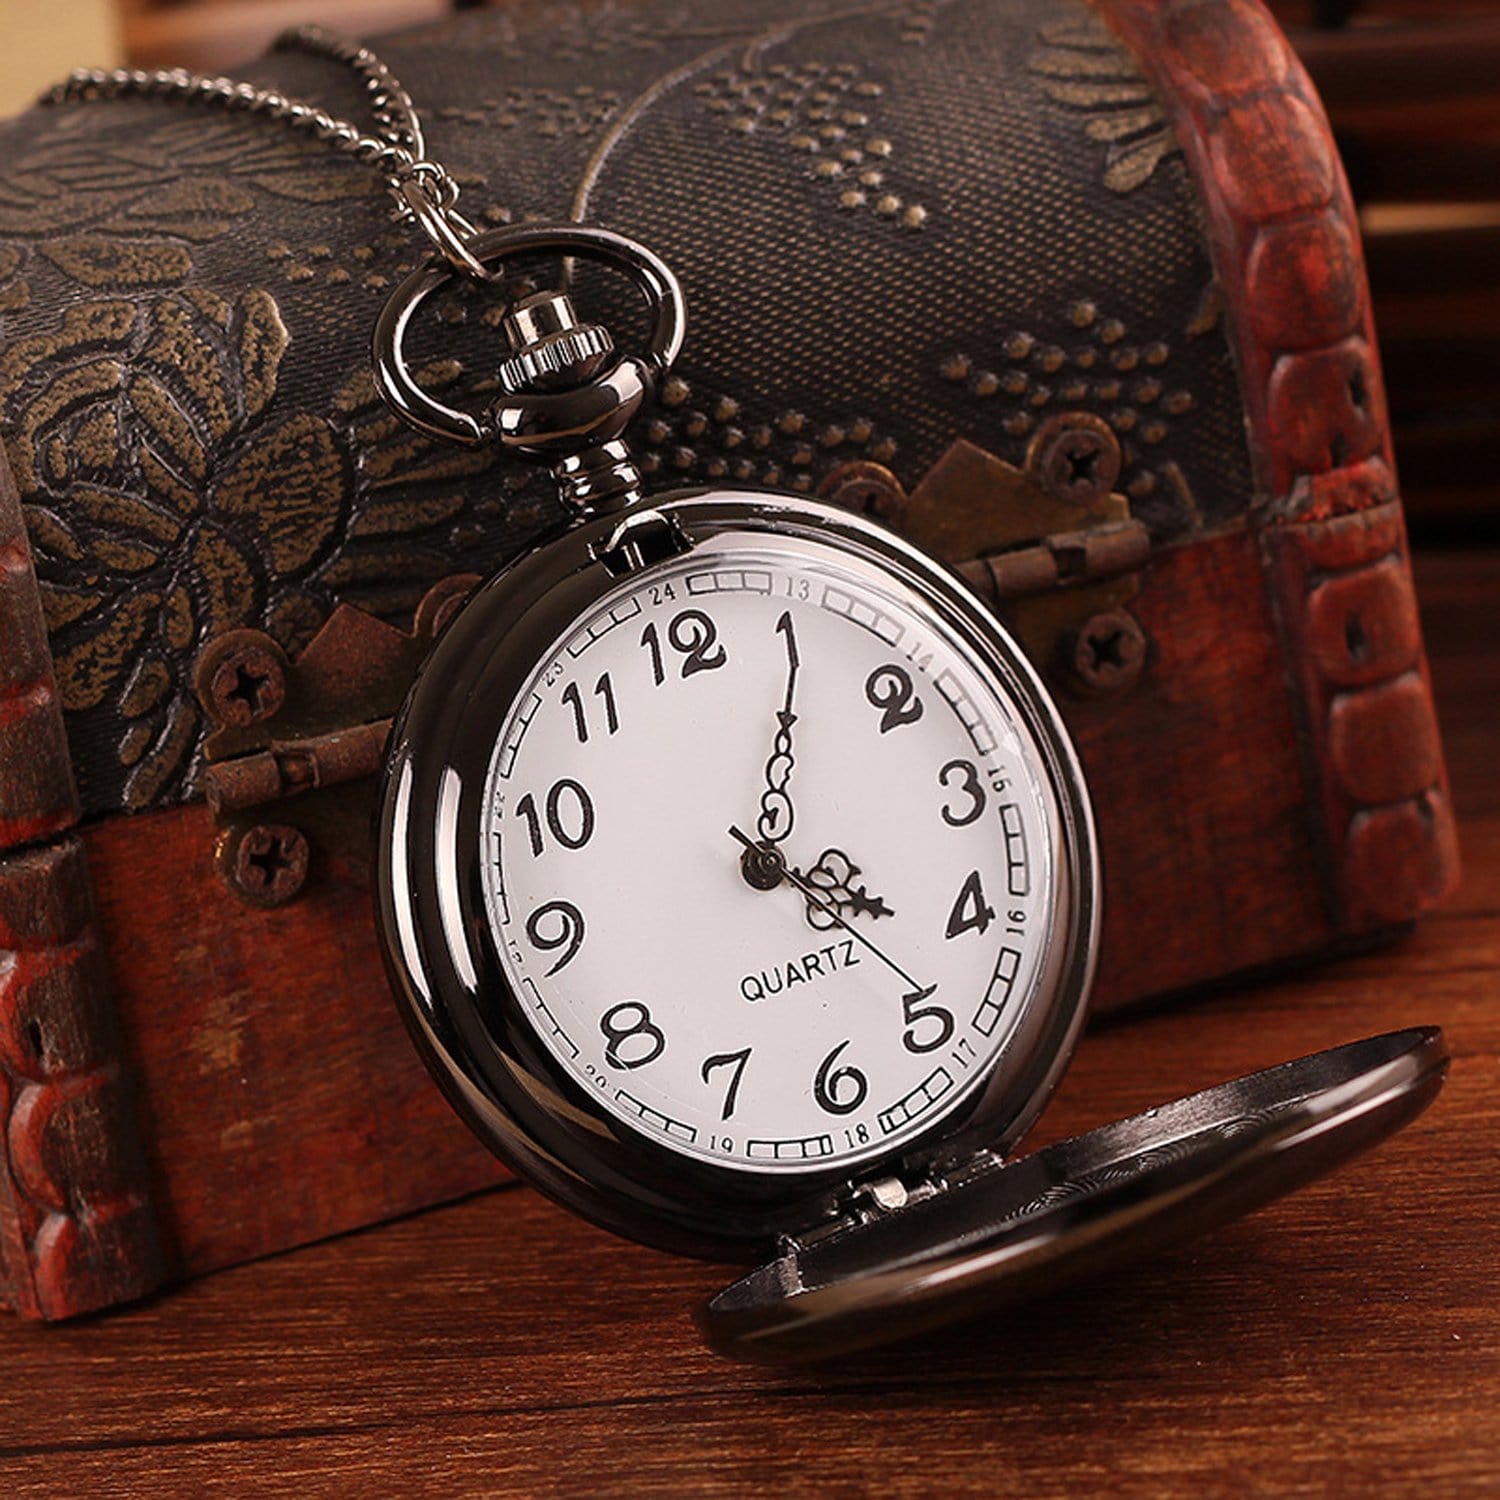 Pocket Watches To Our Son - You Will Never Lose Pocket Watch GiveMe-Gifts